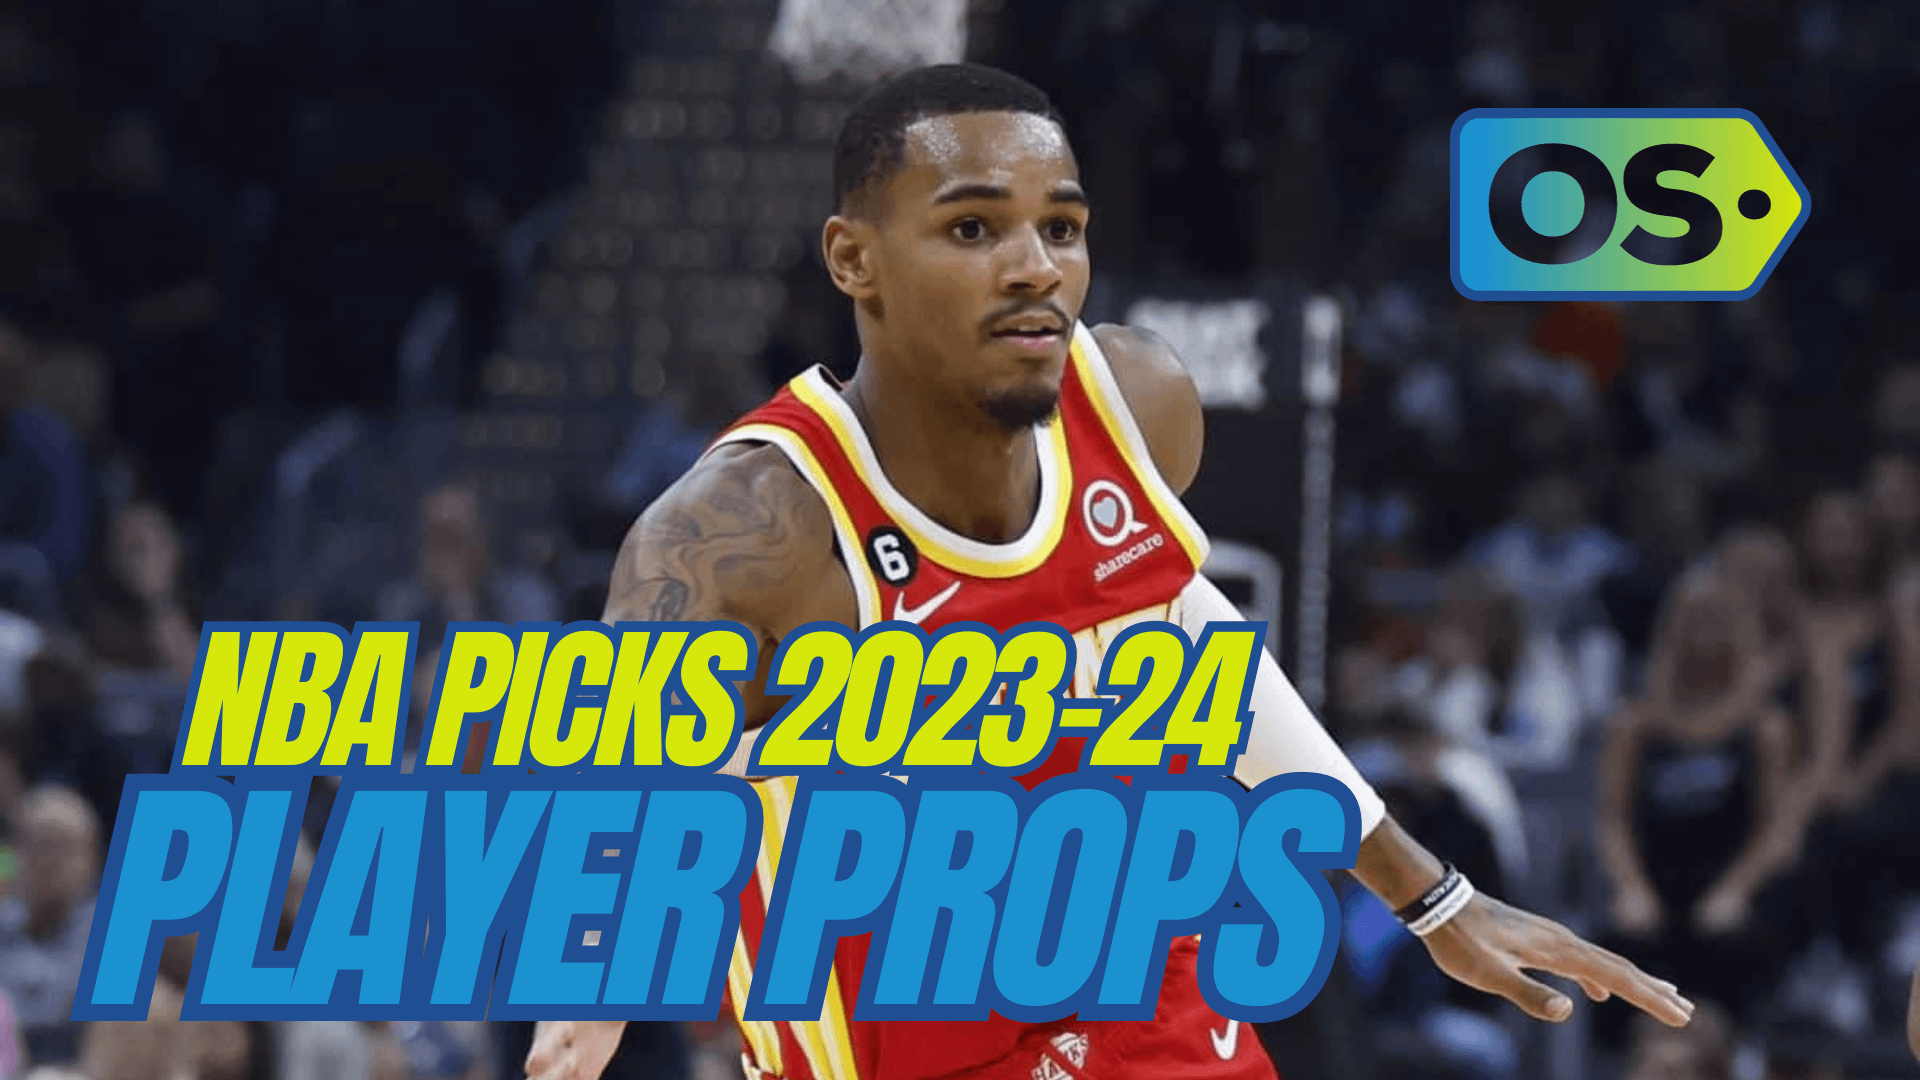 The best NBA player prop bets and picks today for Tuesday, February 27, include wagers on Cade Cunningham and Dejounte Murray.